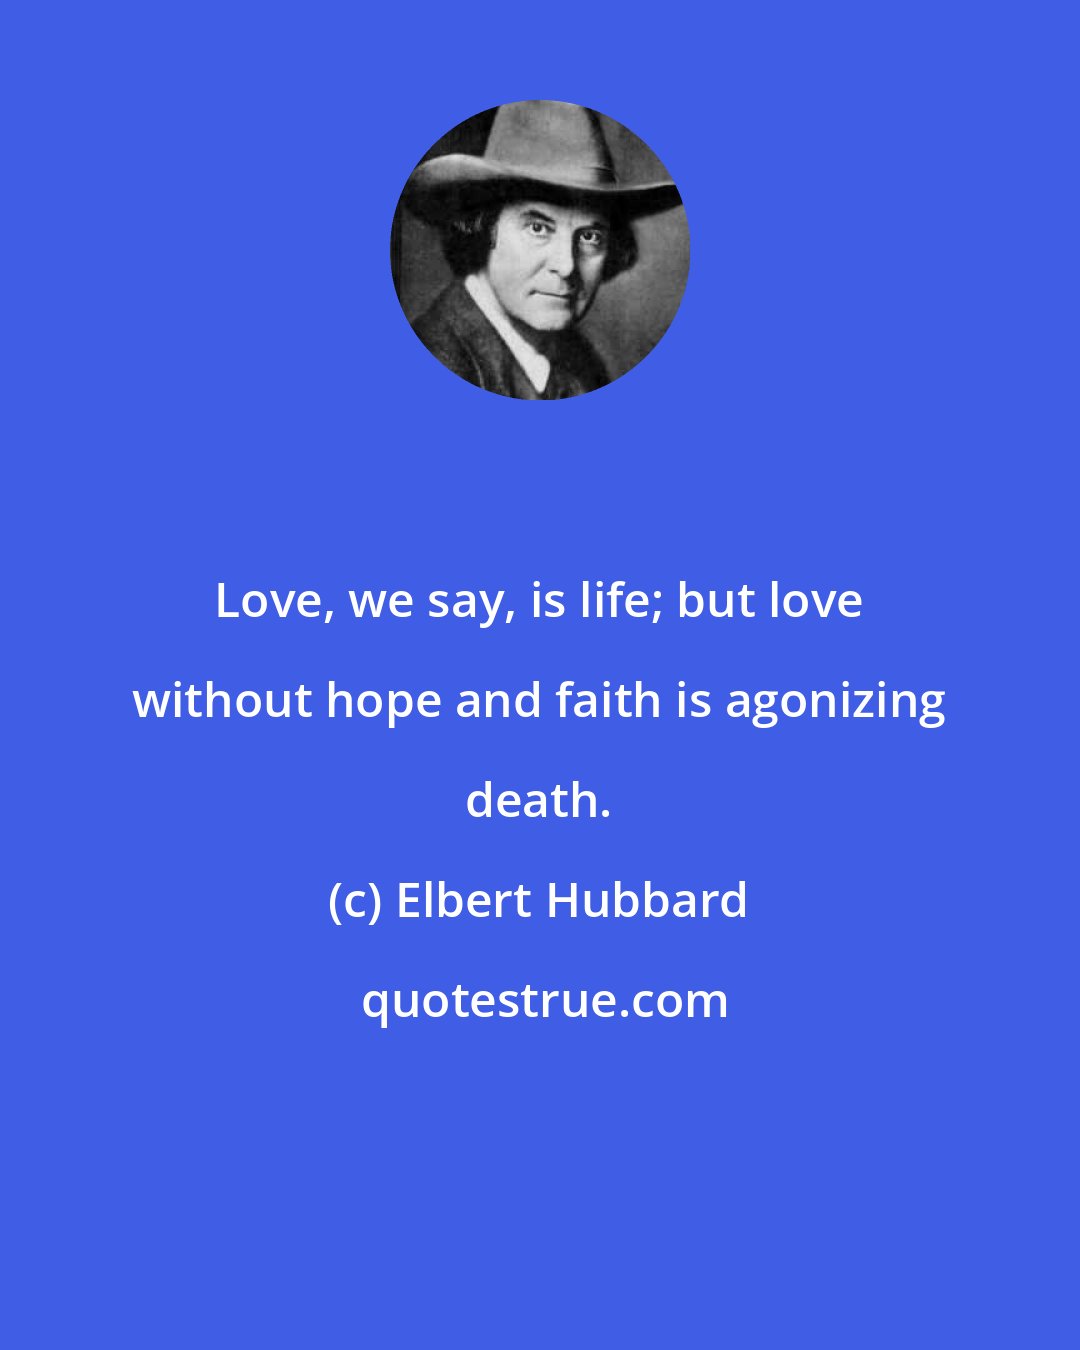 Elbert Hubbard: Love, we say, is life; but love without hope and faith is agonizing death.